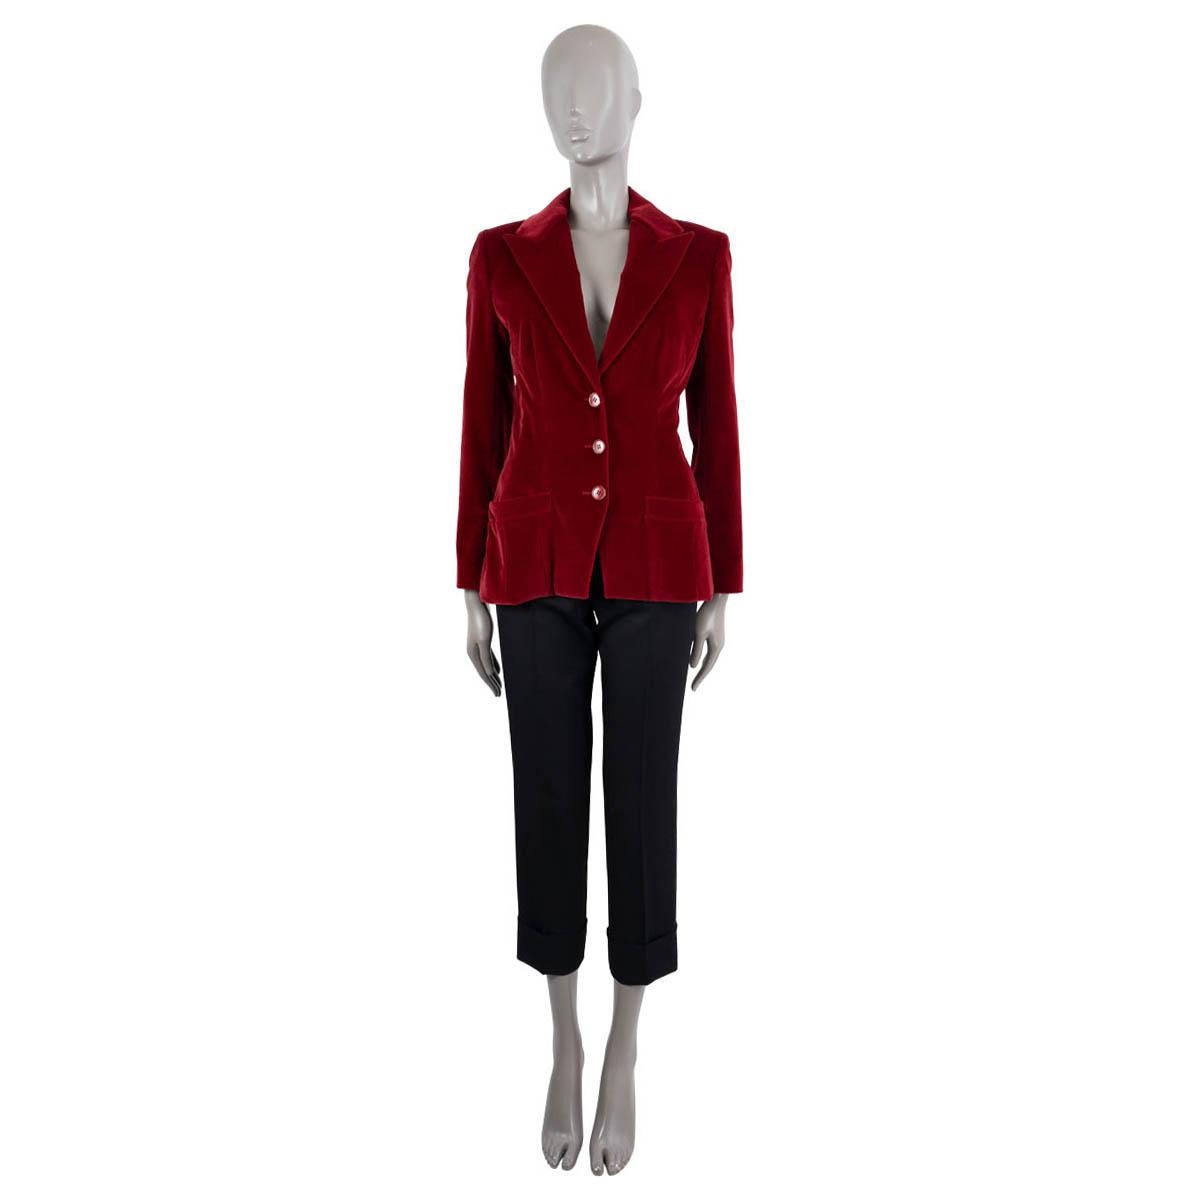 100% authentic Christian Dior blazer in soft burgundy velvet cotton (98%) and elastane (2%). The design features three front buttons, two front slit pockets a classic peak lapel and a pleated back. Lined in burgundy silk (94%) and lycra (2%). Has